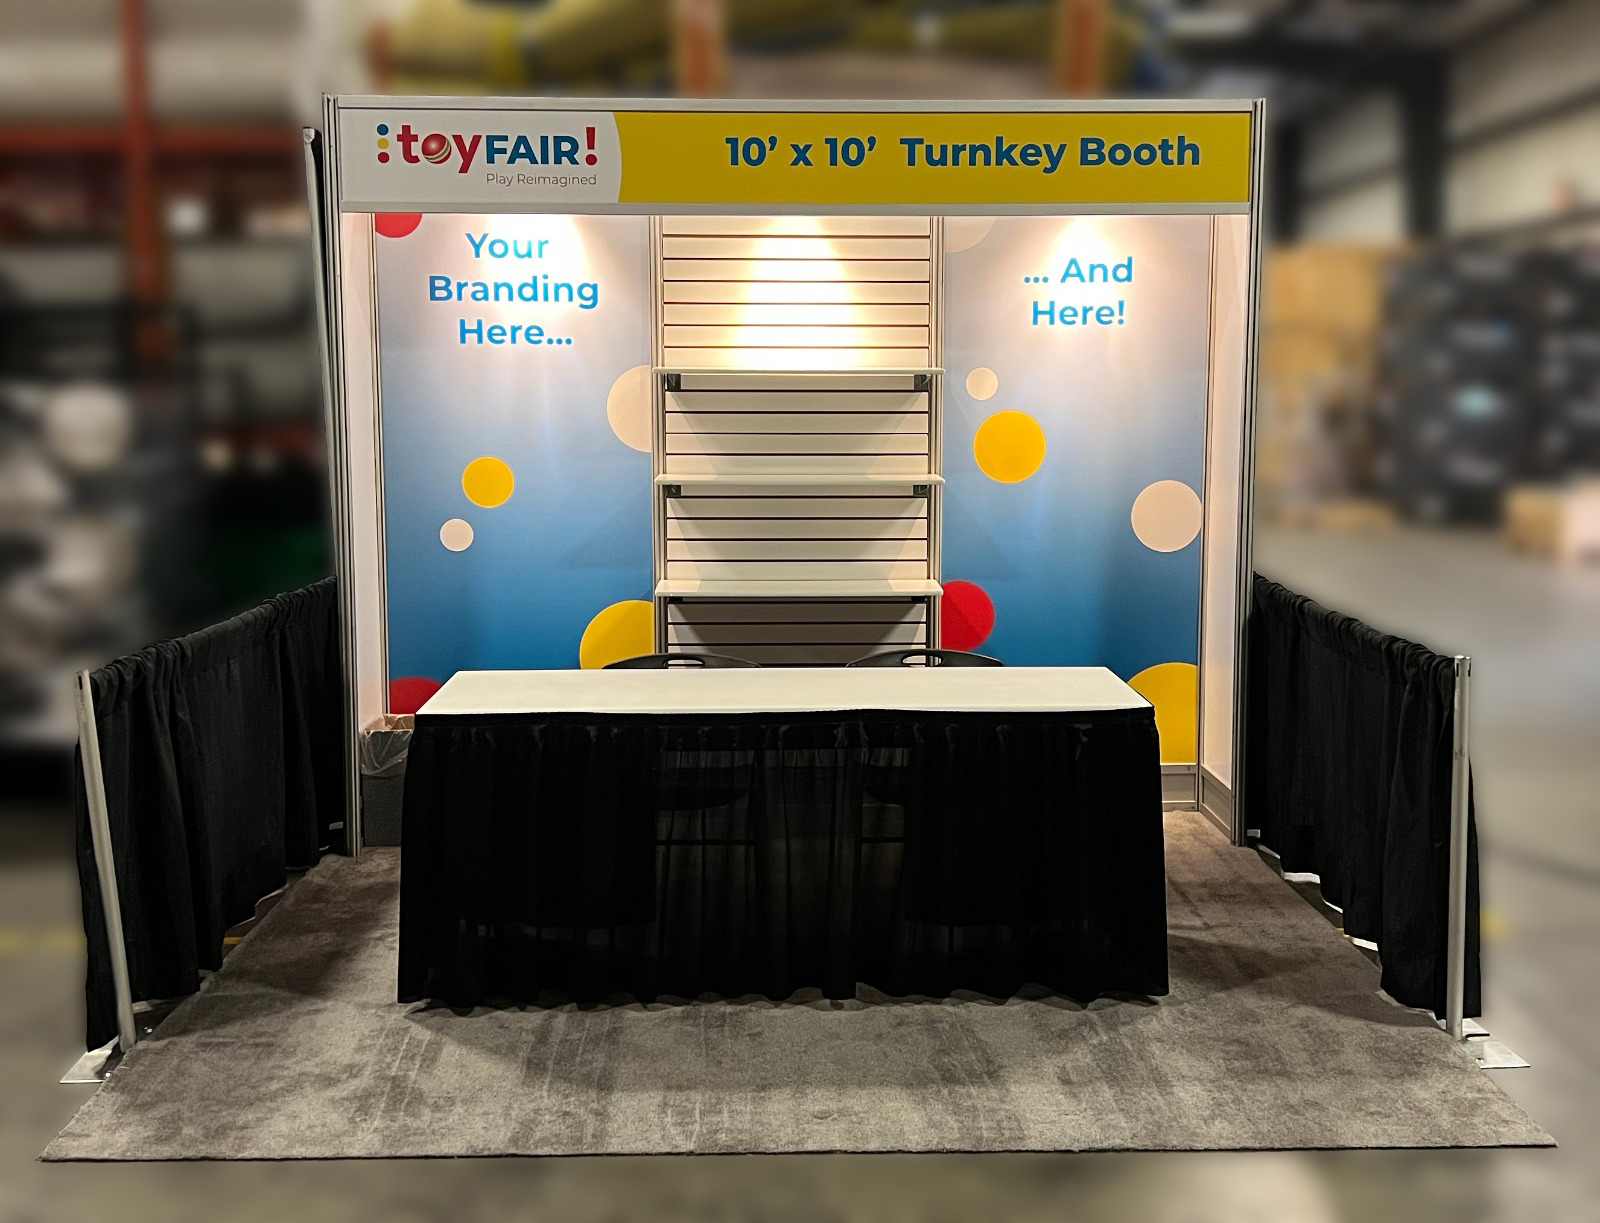 toy-fair-turnkey-booth